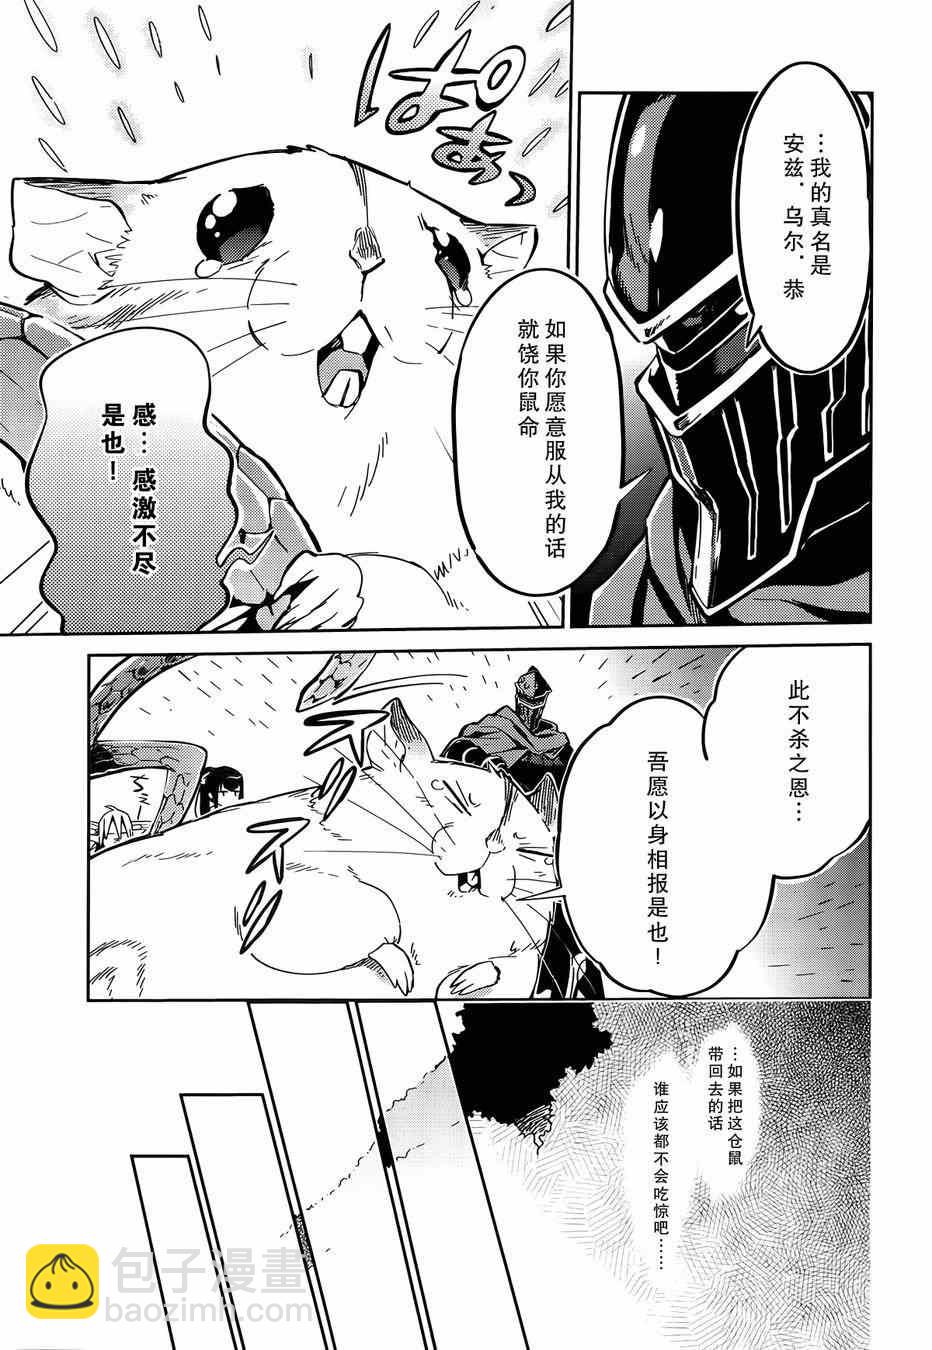 OVERLORD - 第7話 - 2